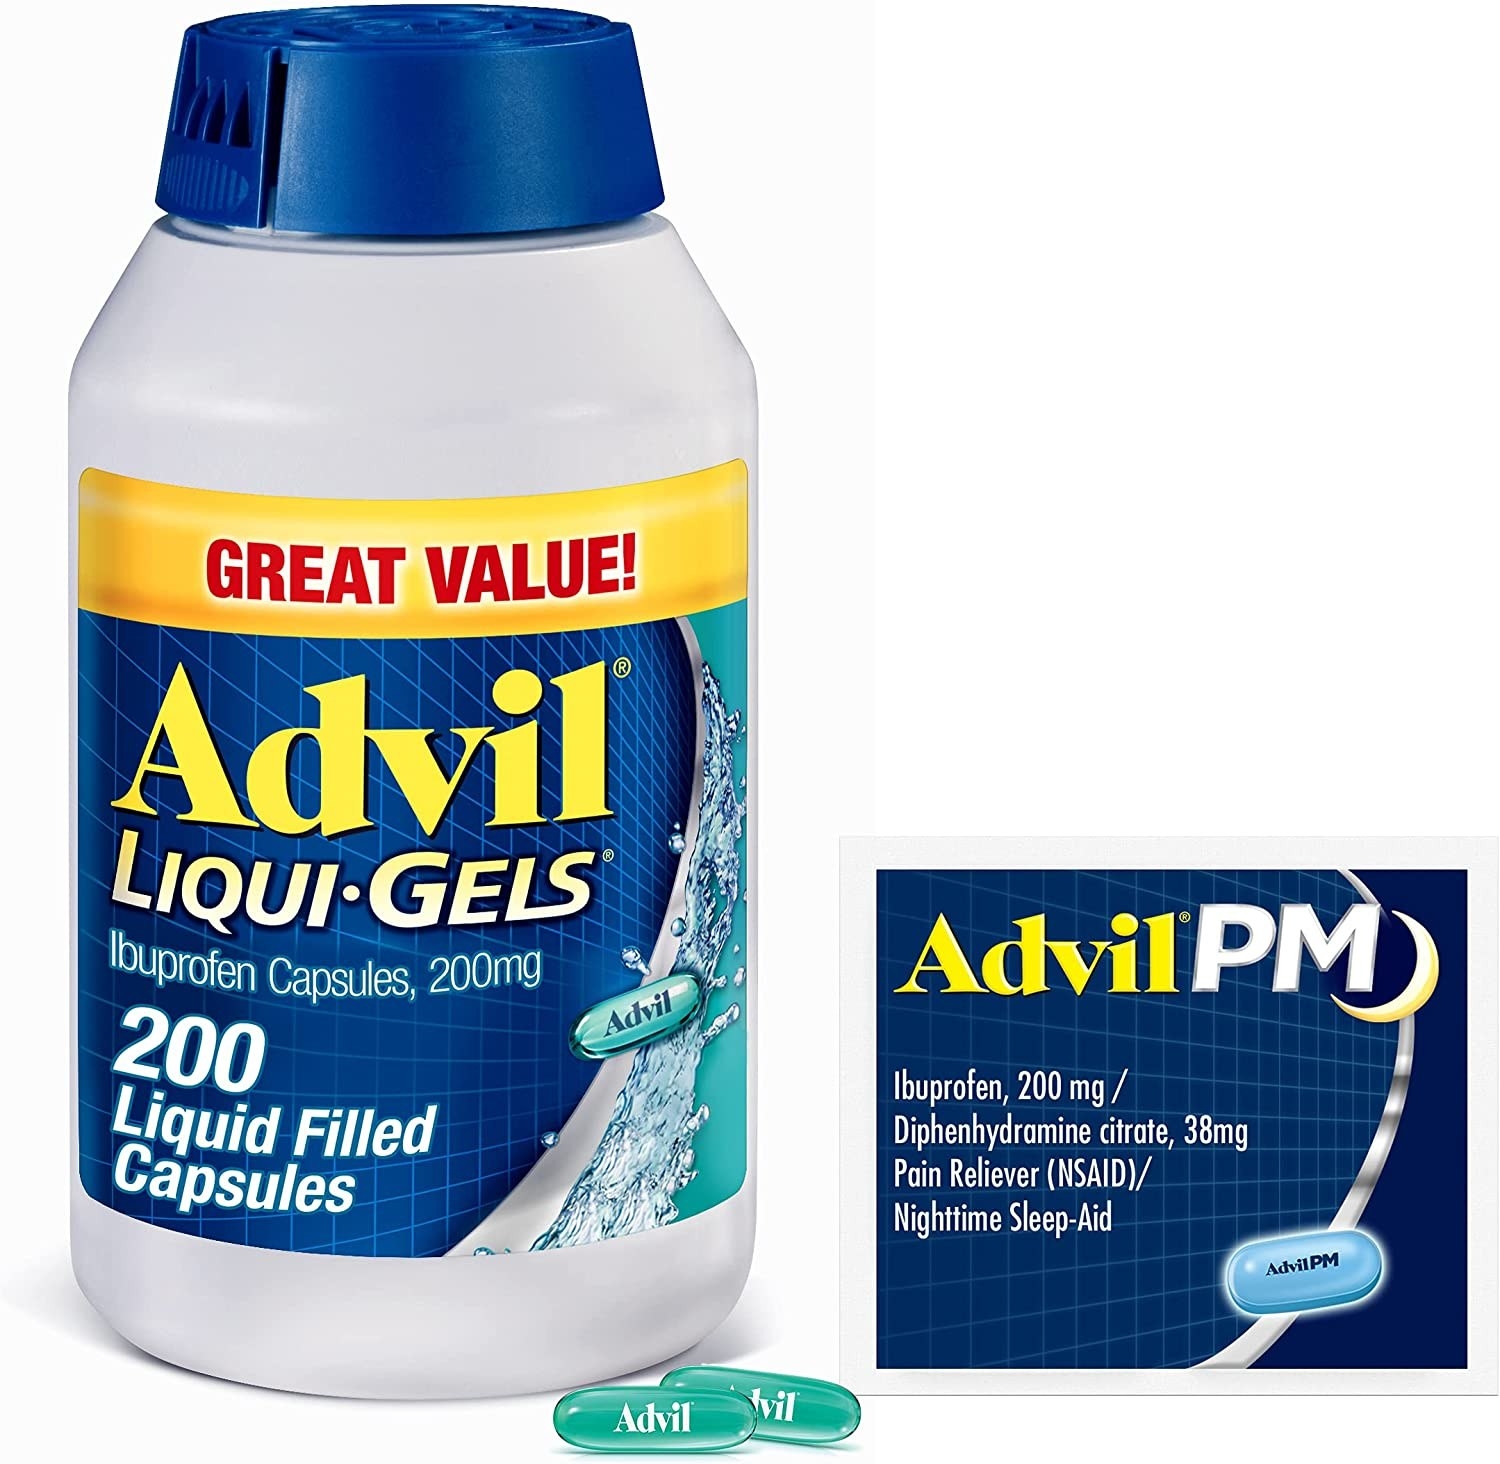 the bottle of advil and a small box of advil pm with two pills